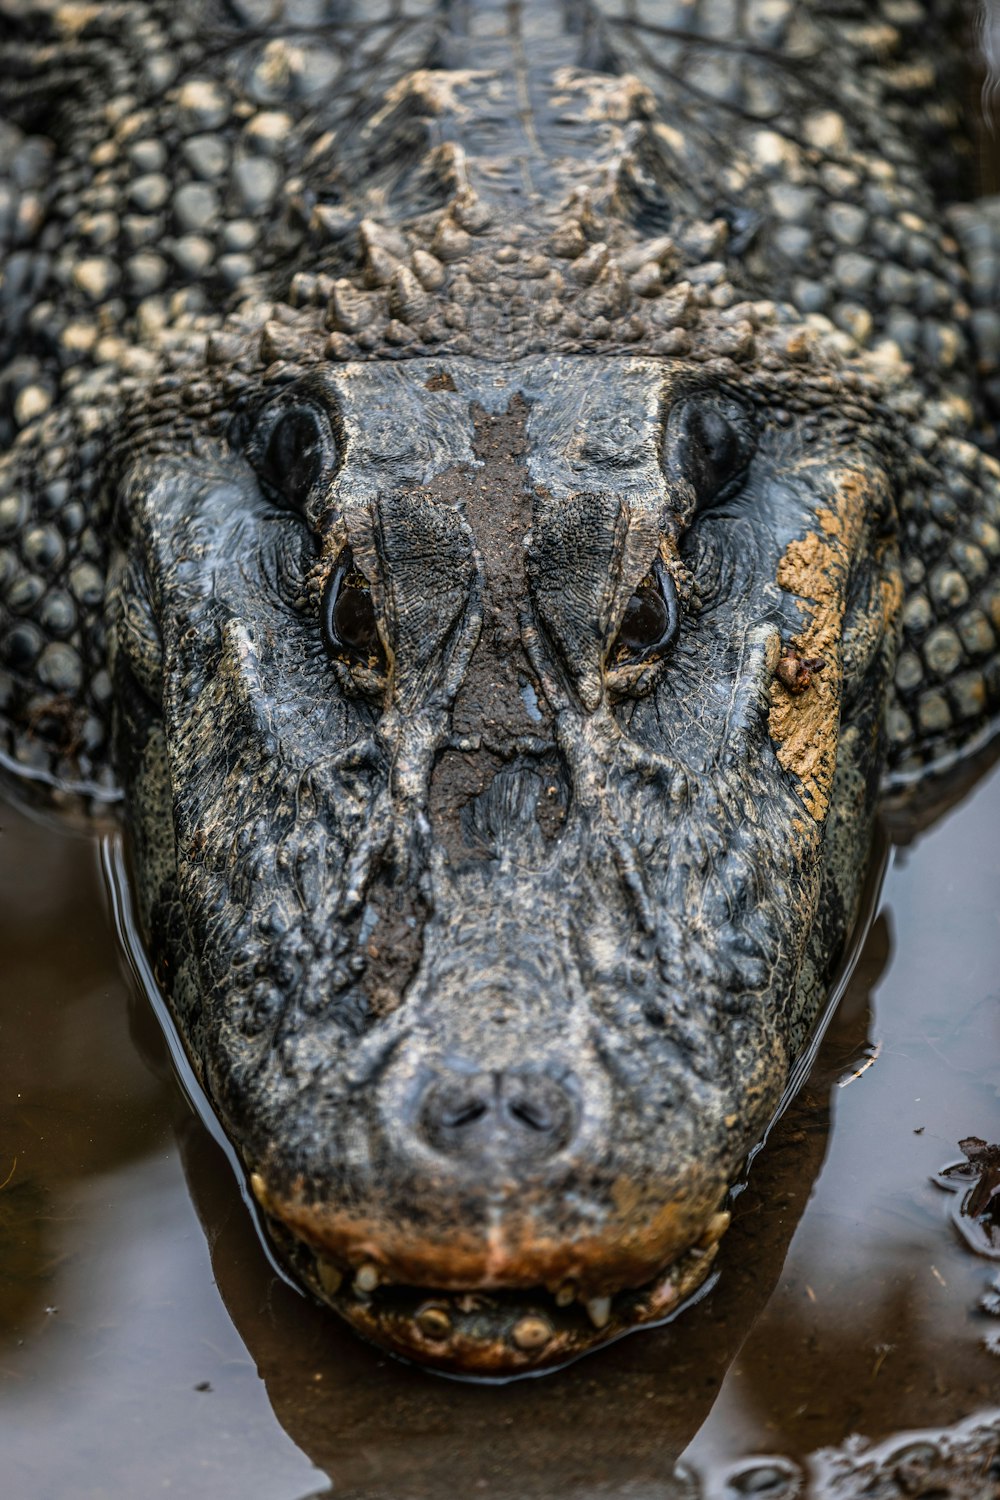 a close up of an alligator's head in a body of water